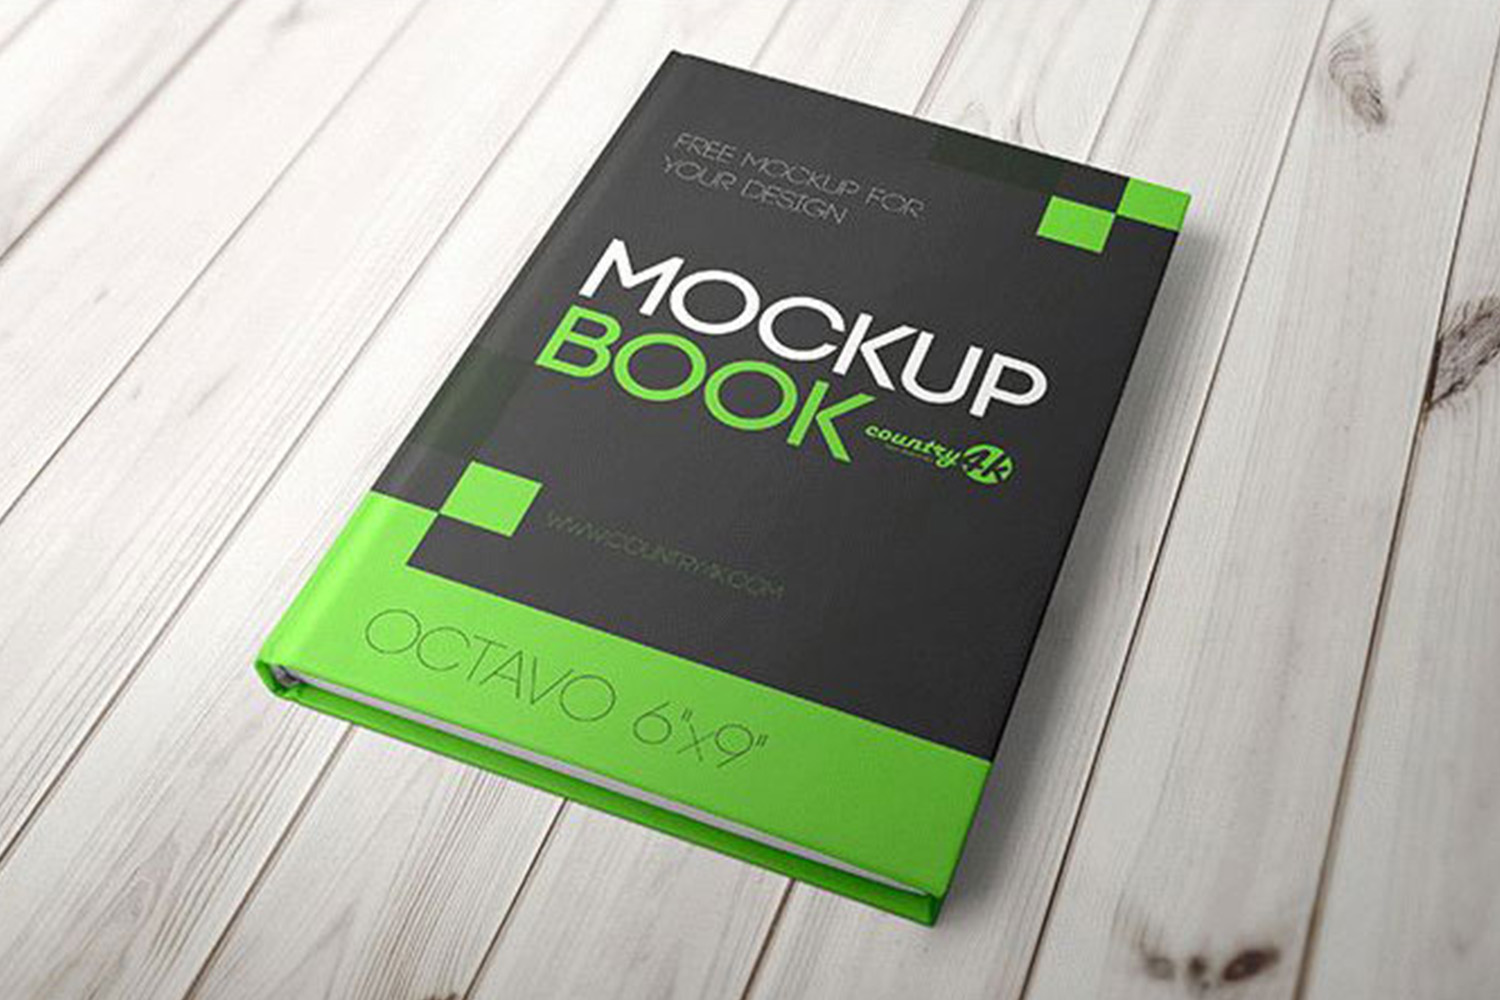 Hardcover Book Free download